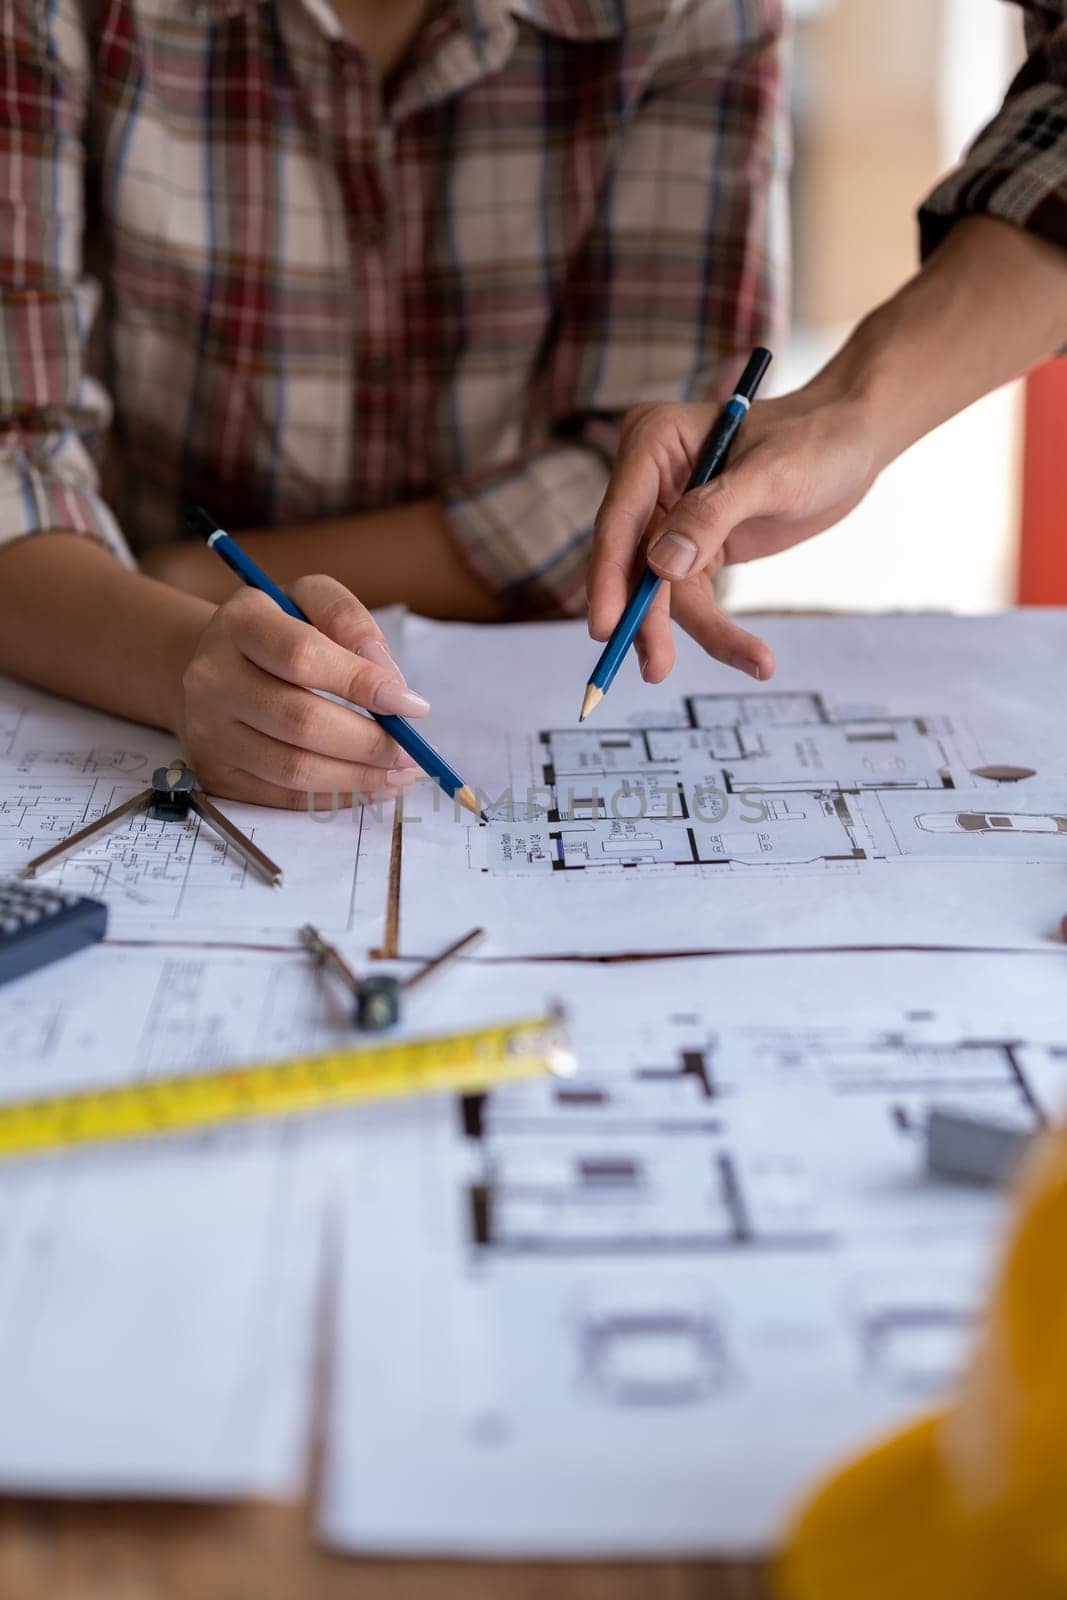 engineer are helping to design work on blueprints, engineer people meeting working and pointing at a paper, professional engineer and architect are drafting a constuction house room building. High quality photo